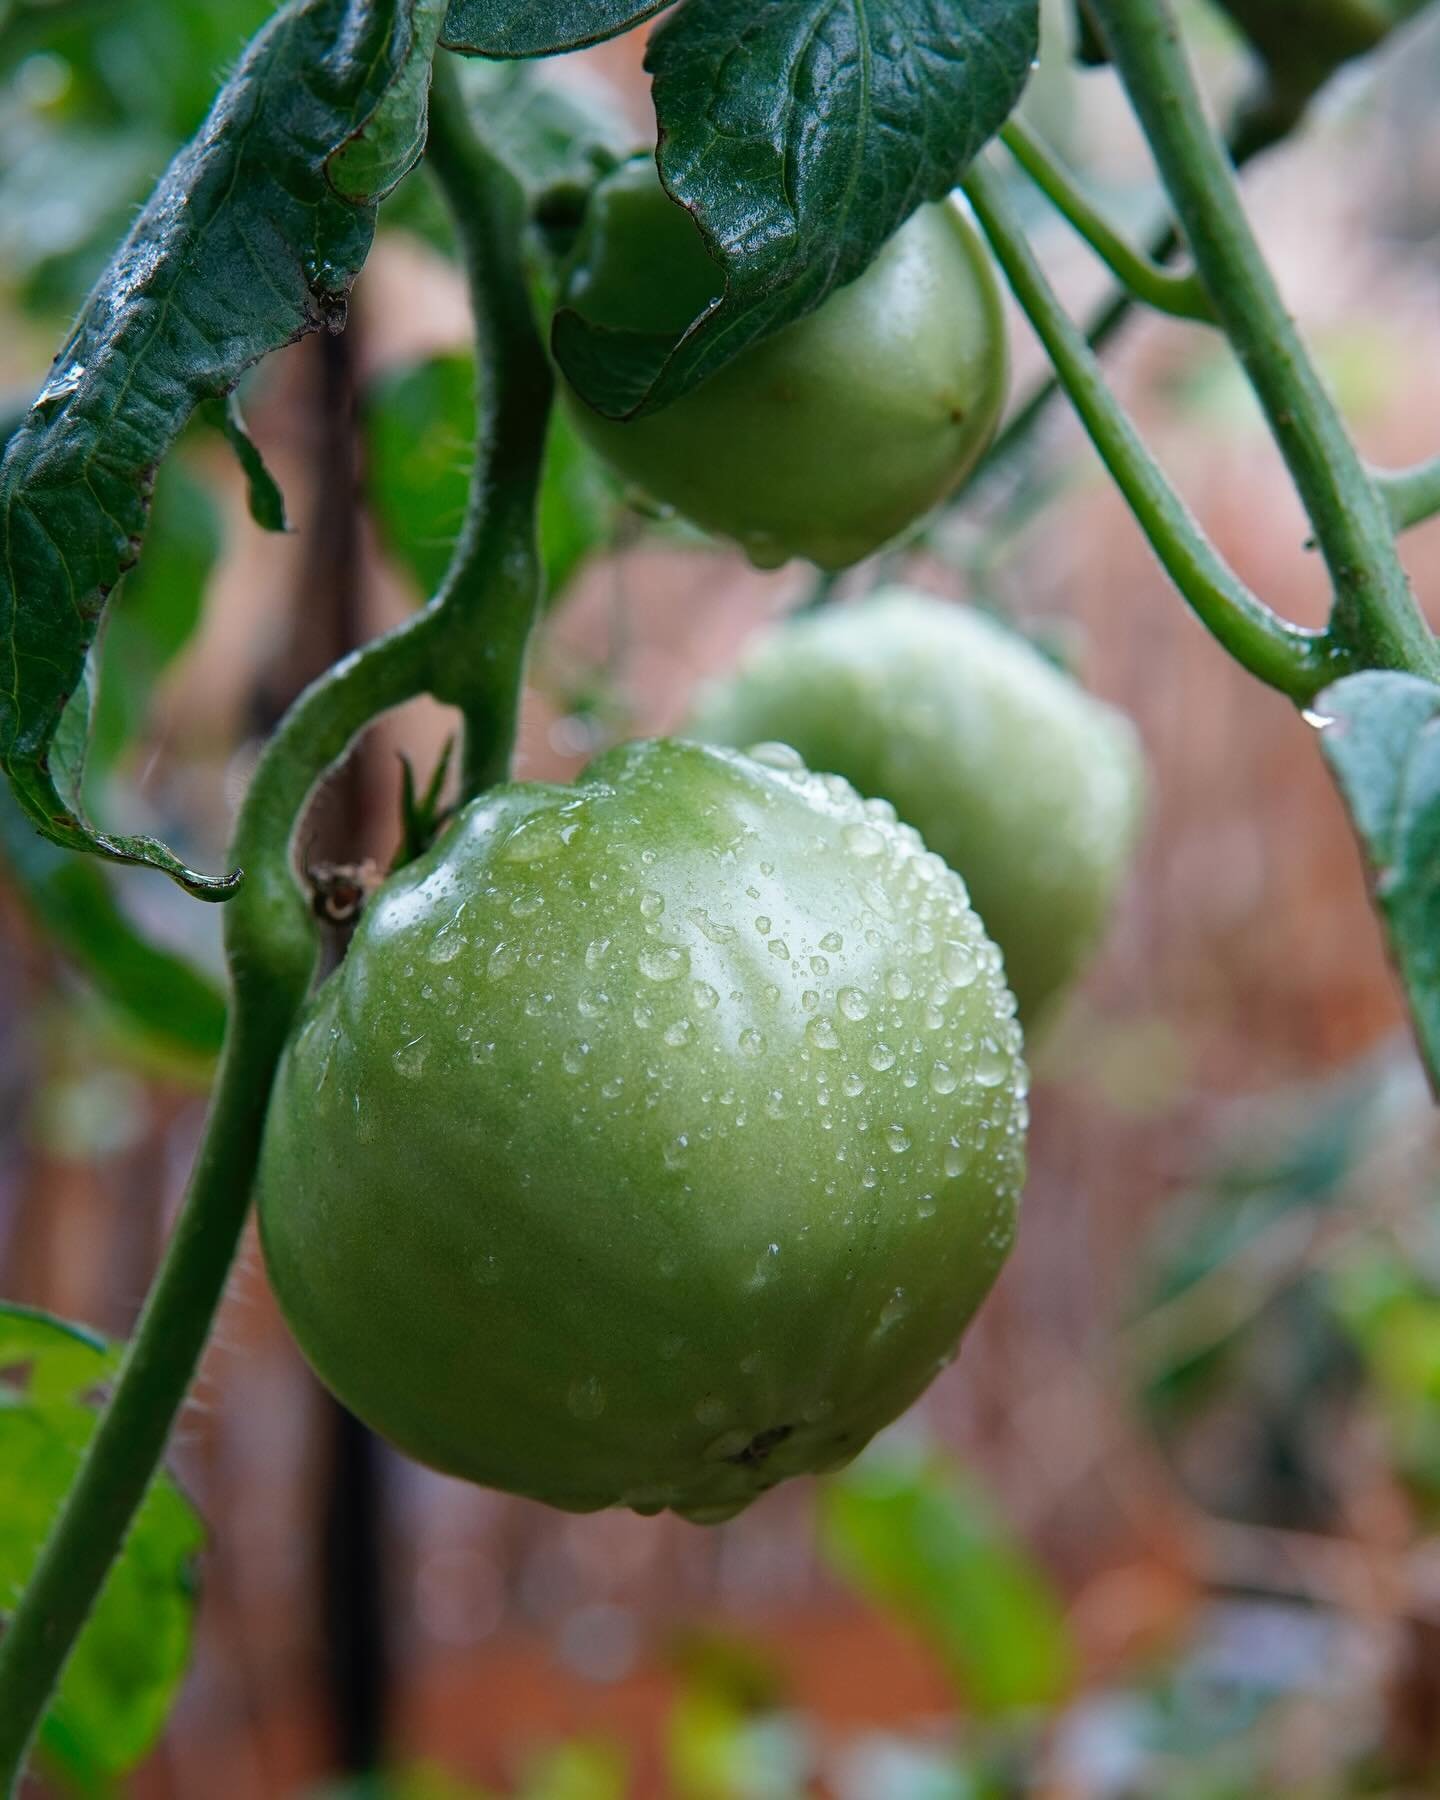 🍅 It&rsquo;s Tomato Time! Our tomatoes are in the ground and starting to take off. But with growth comes a need for pruning, which helps the plant spend its energy on producing fruit instead of growing offshoots. Join us Monday, May 13 at 7 p.m. to 